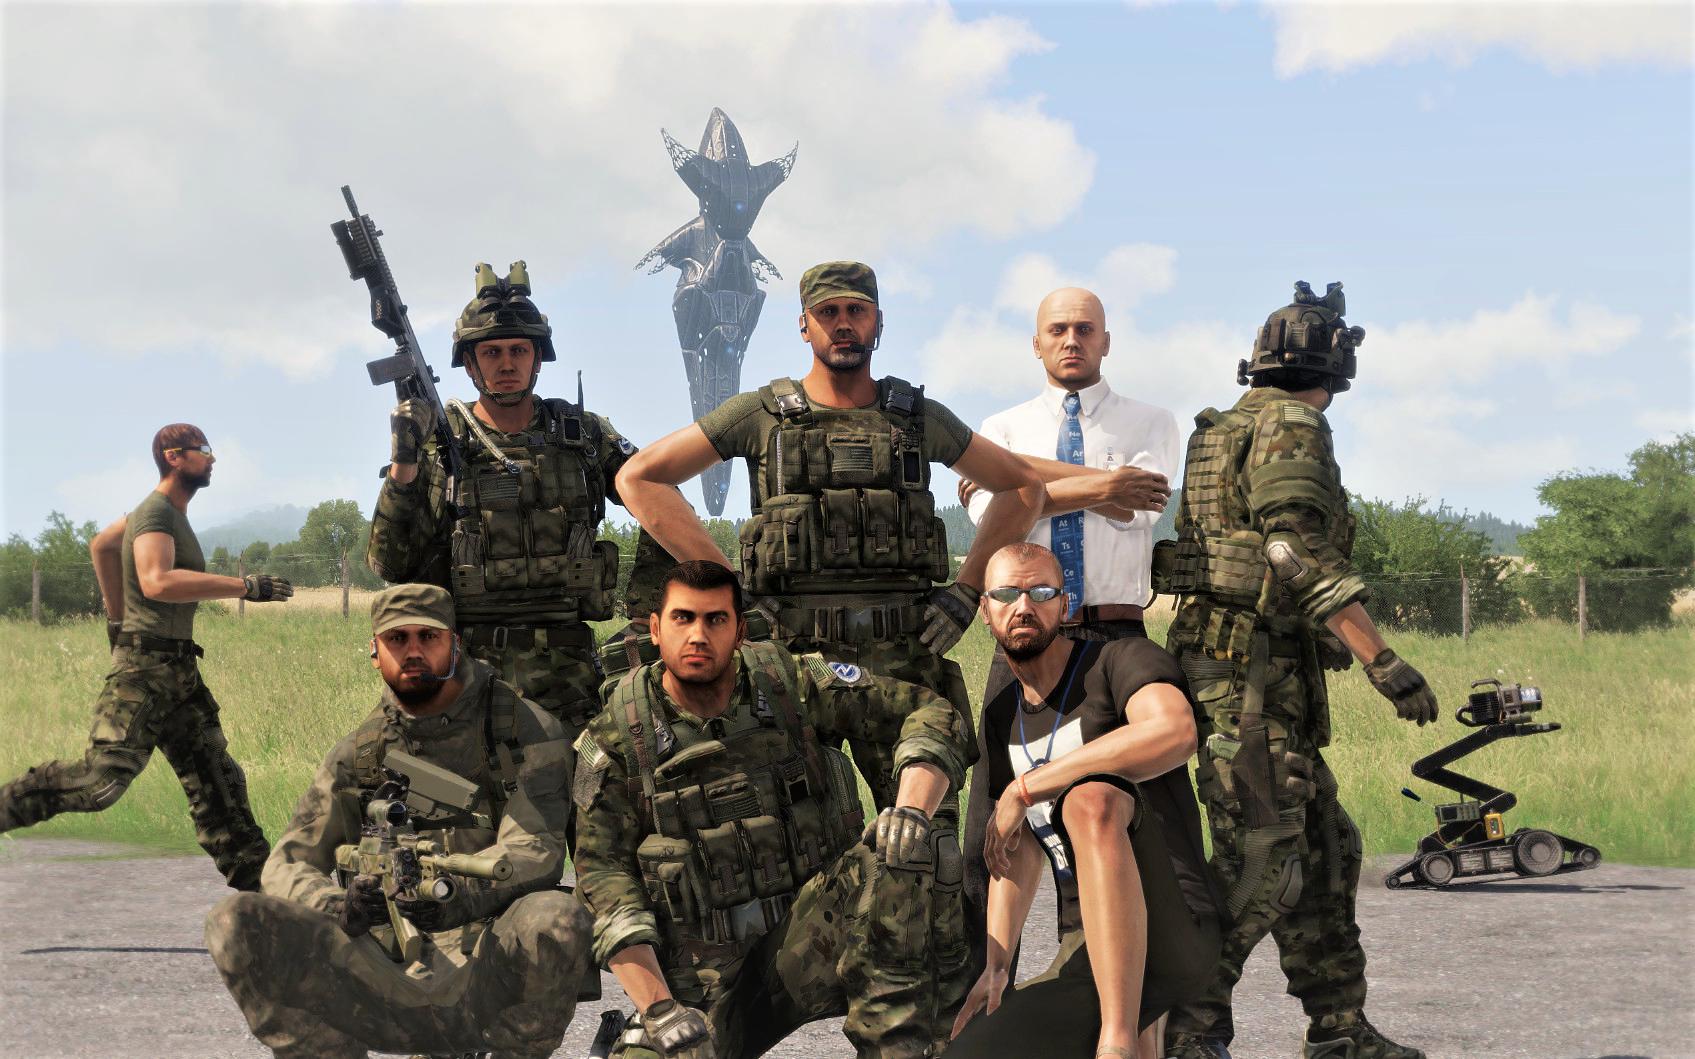 Arma 3 Meet The Cast Of The First Contact Singleplayer Campaign Pvt Jed Dillon Maj Donald The Don Homewood Dr Ian Kesson Lt John Kingsly Cpt Ivan Severov Spc Aiden